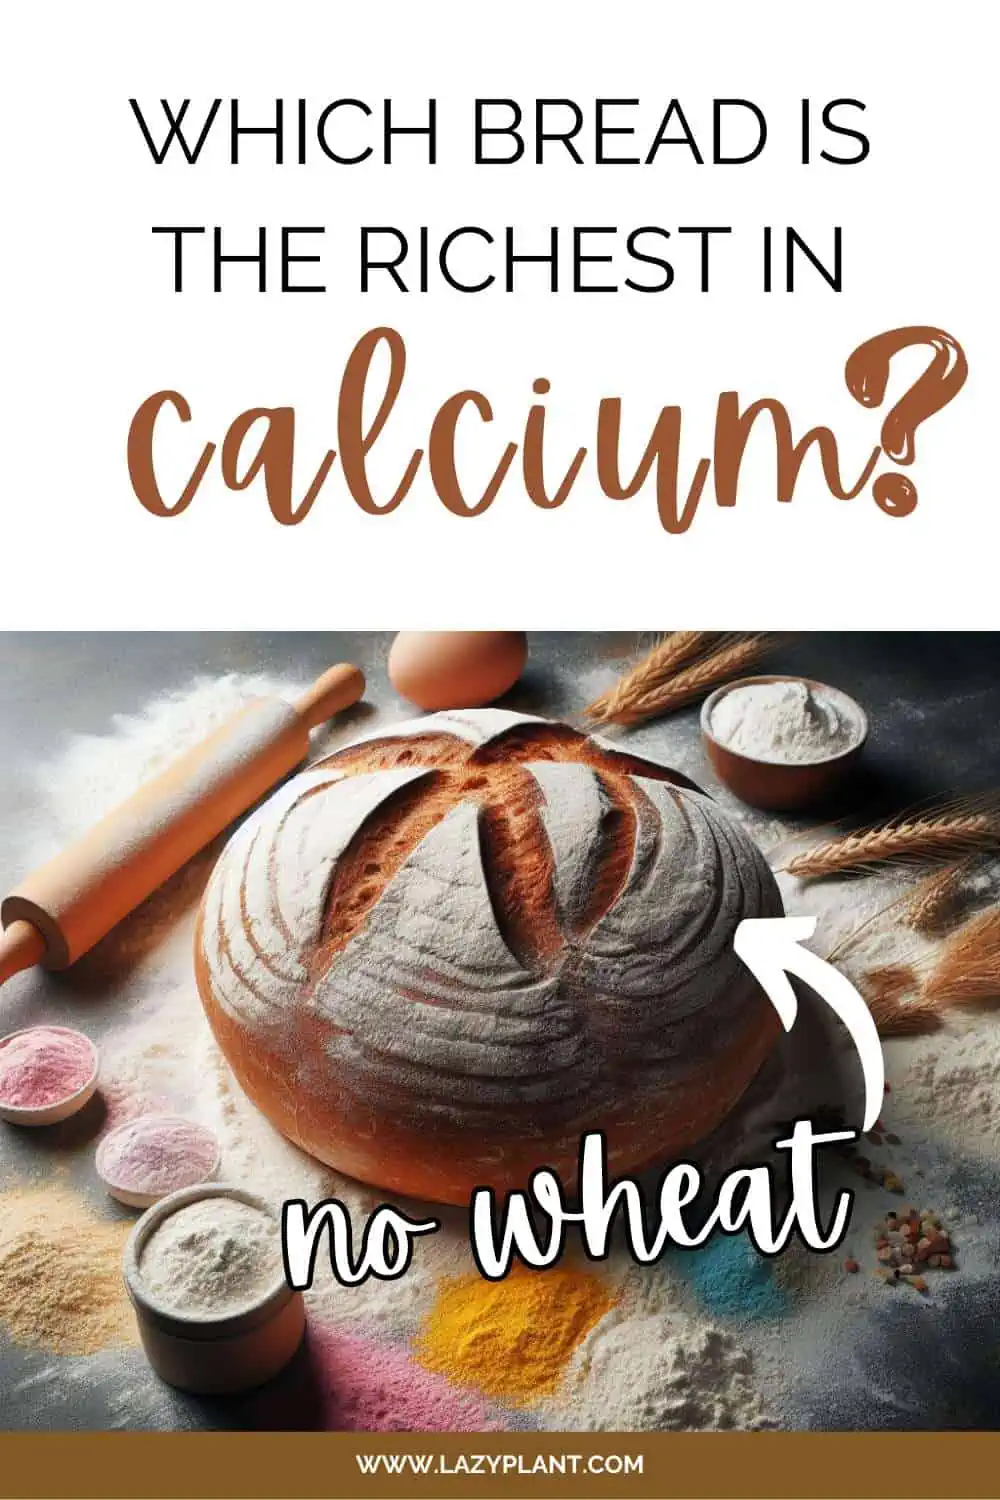 Bread can be an excellent dietary source of Calcium!